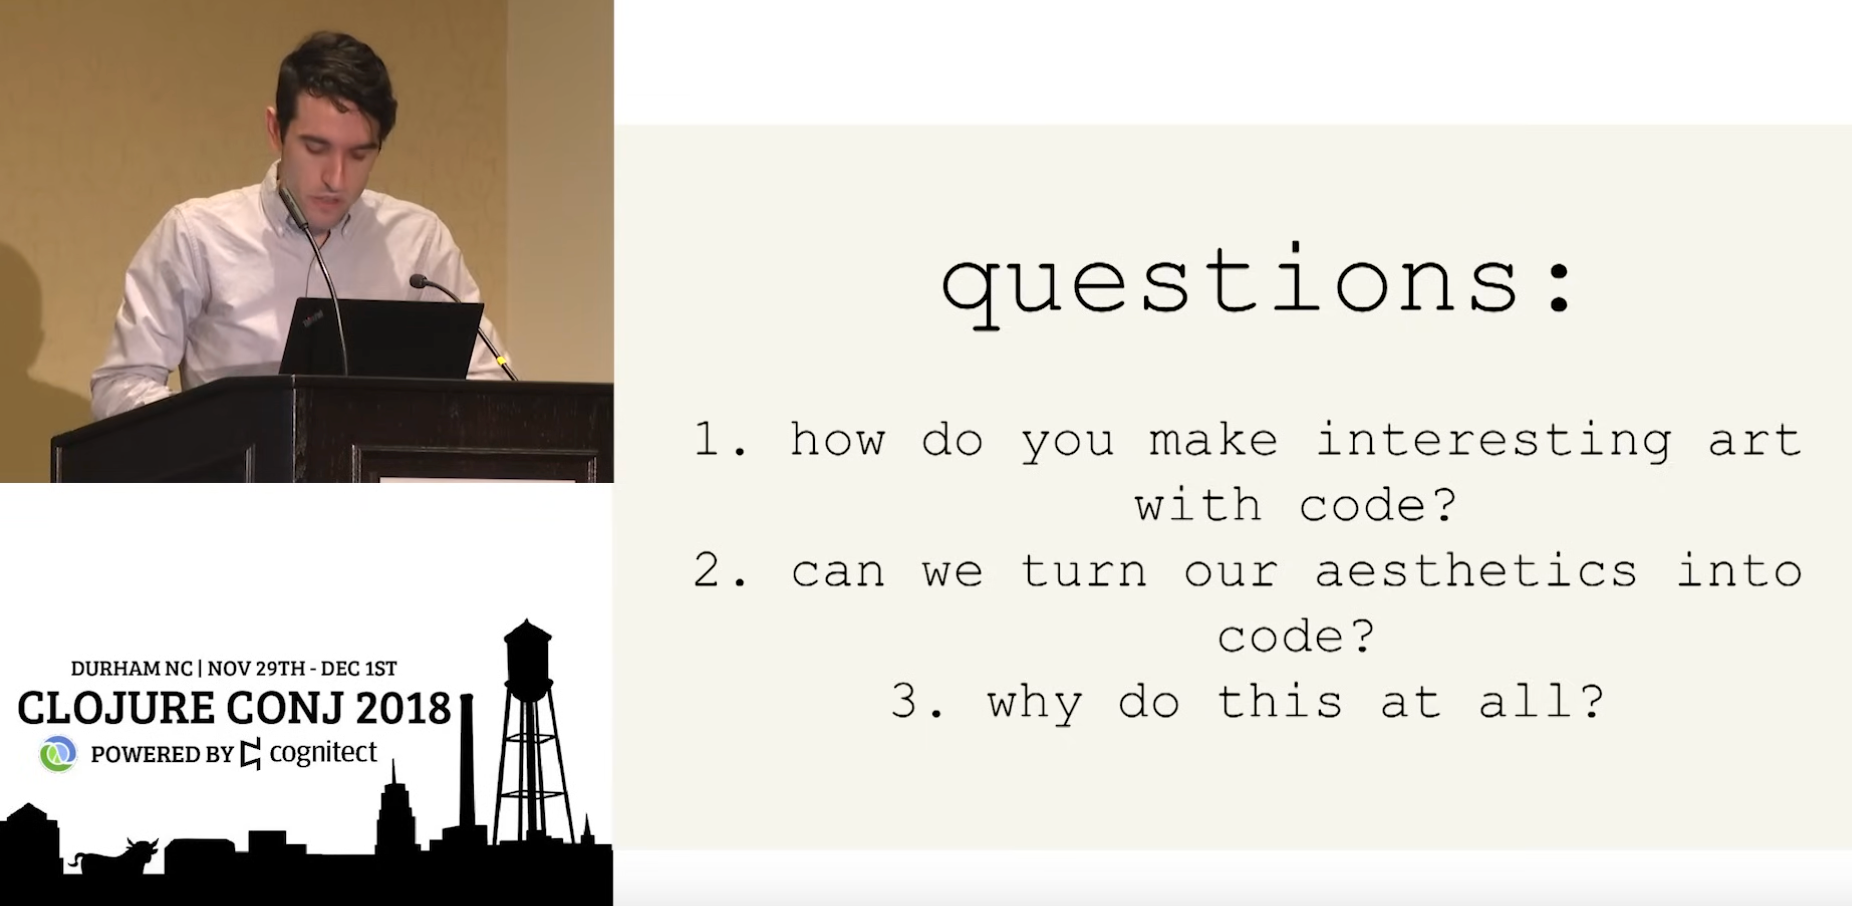 A screenshot of Tyler Hobbs talk at Clojure Con 2018 where he shows a slide in which he asks some important questions about what makes for interesting art.